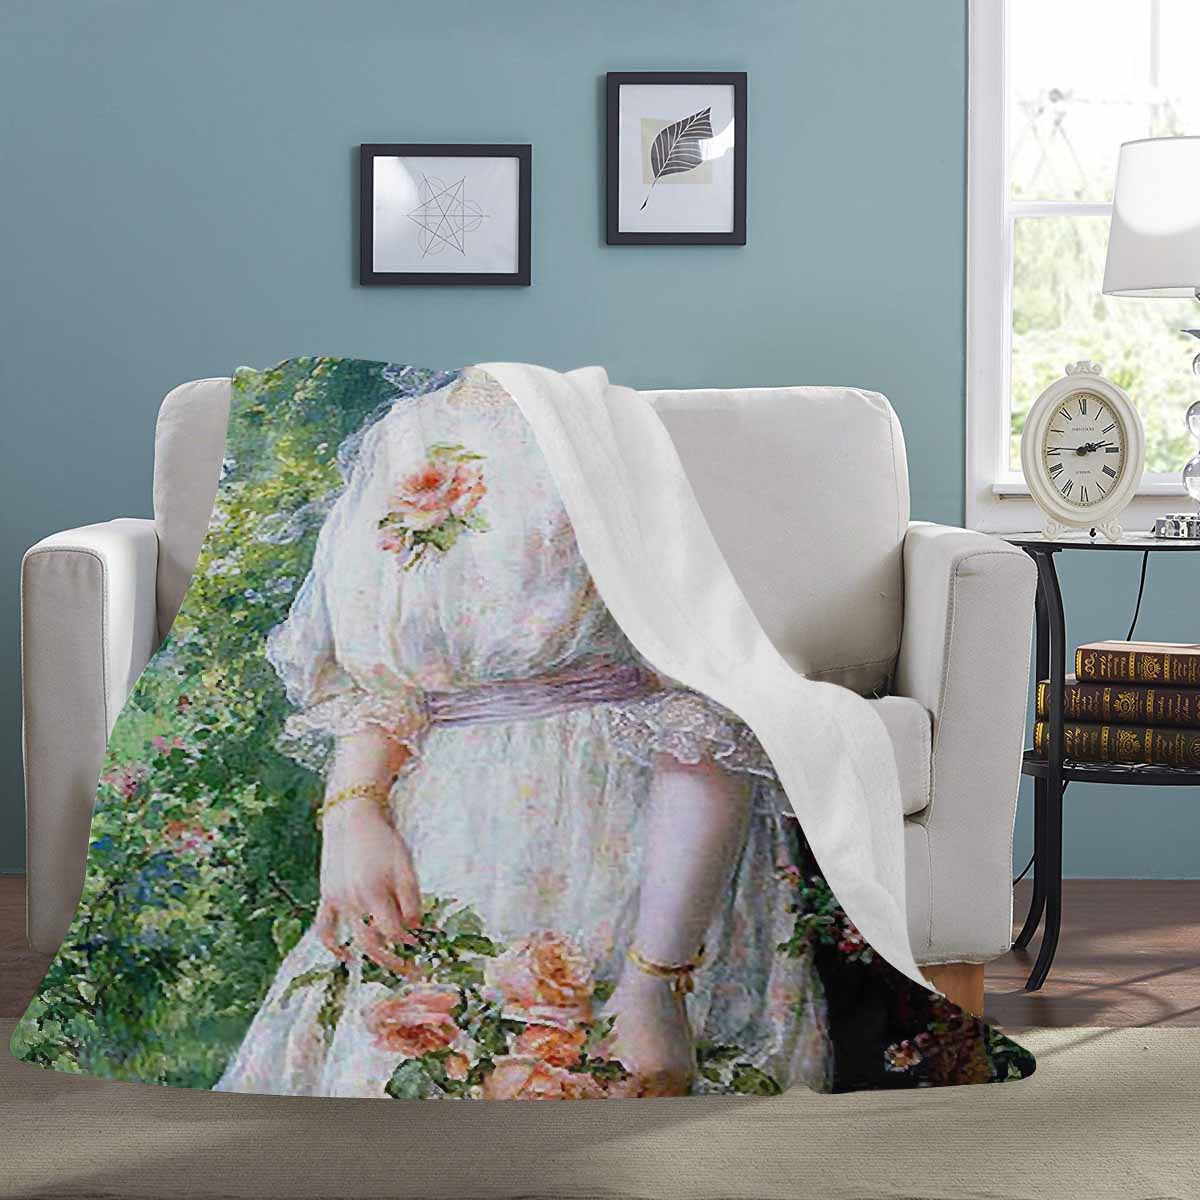 Victorian Lady Design BLANKET, LARGE 60 in x 80 in, Reverie